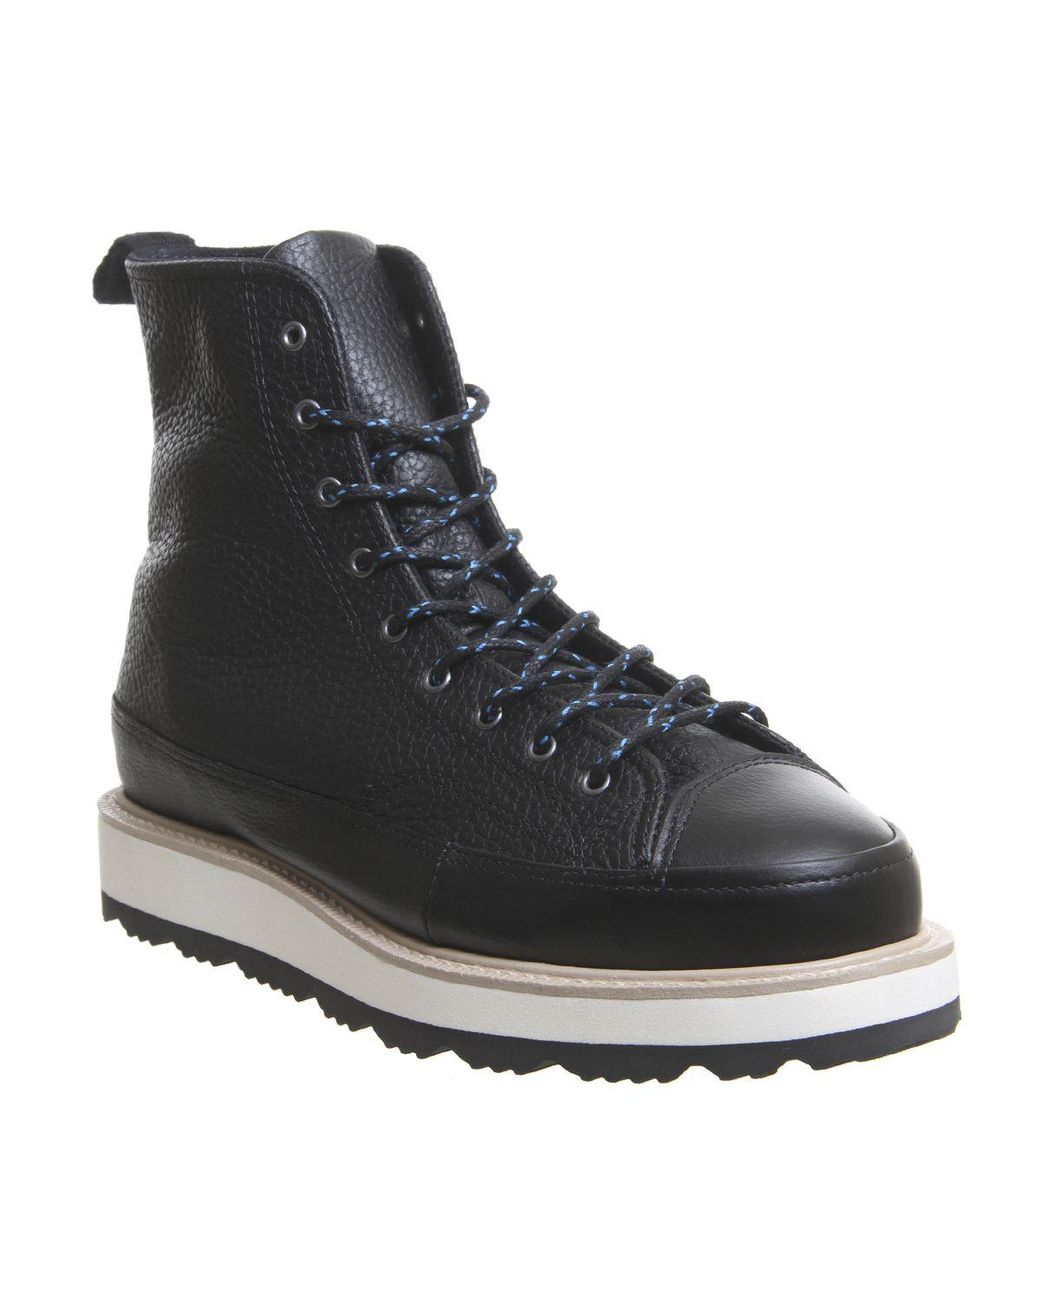 Converse Ct Crafted Boots in Black for Men - Save 51% - Lyst